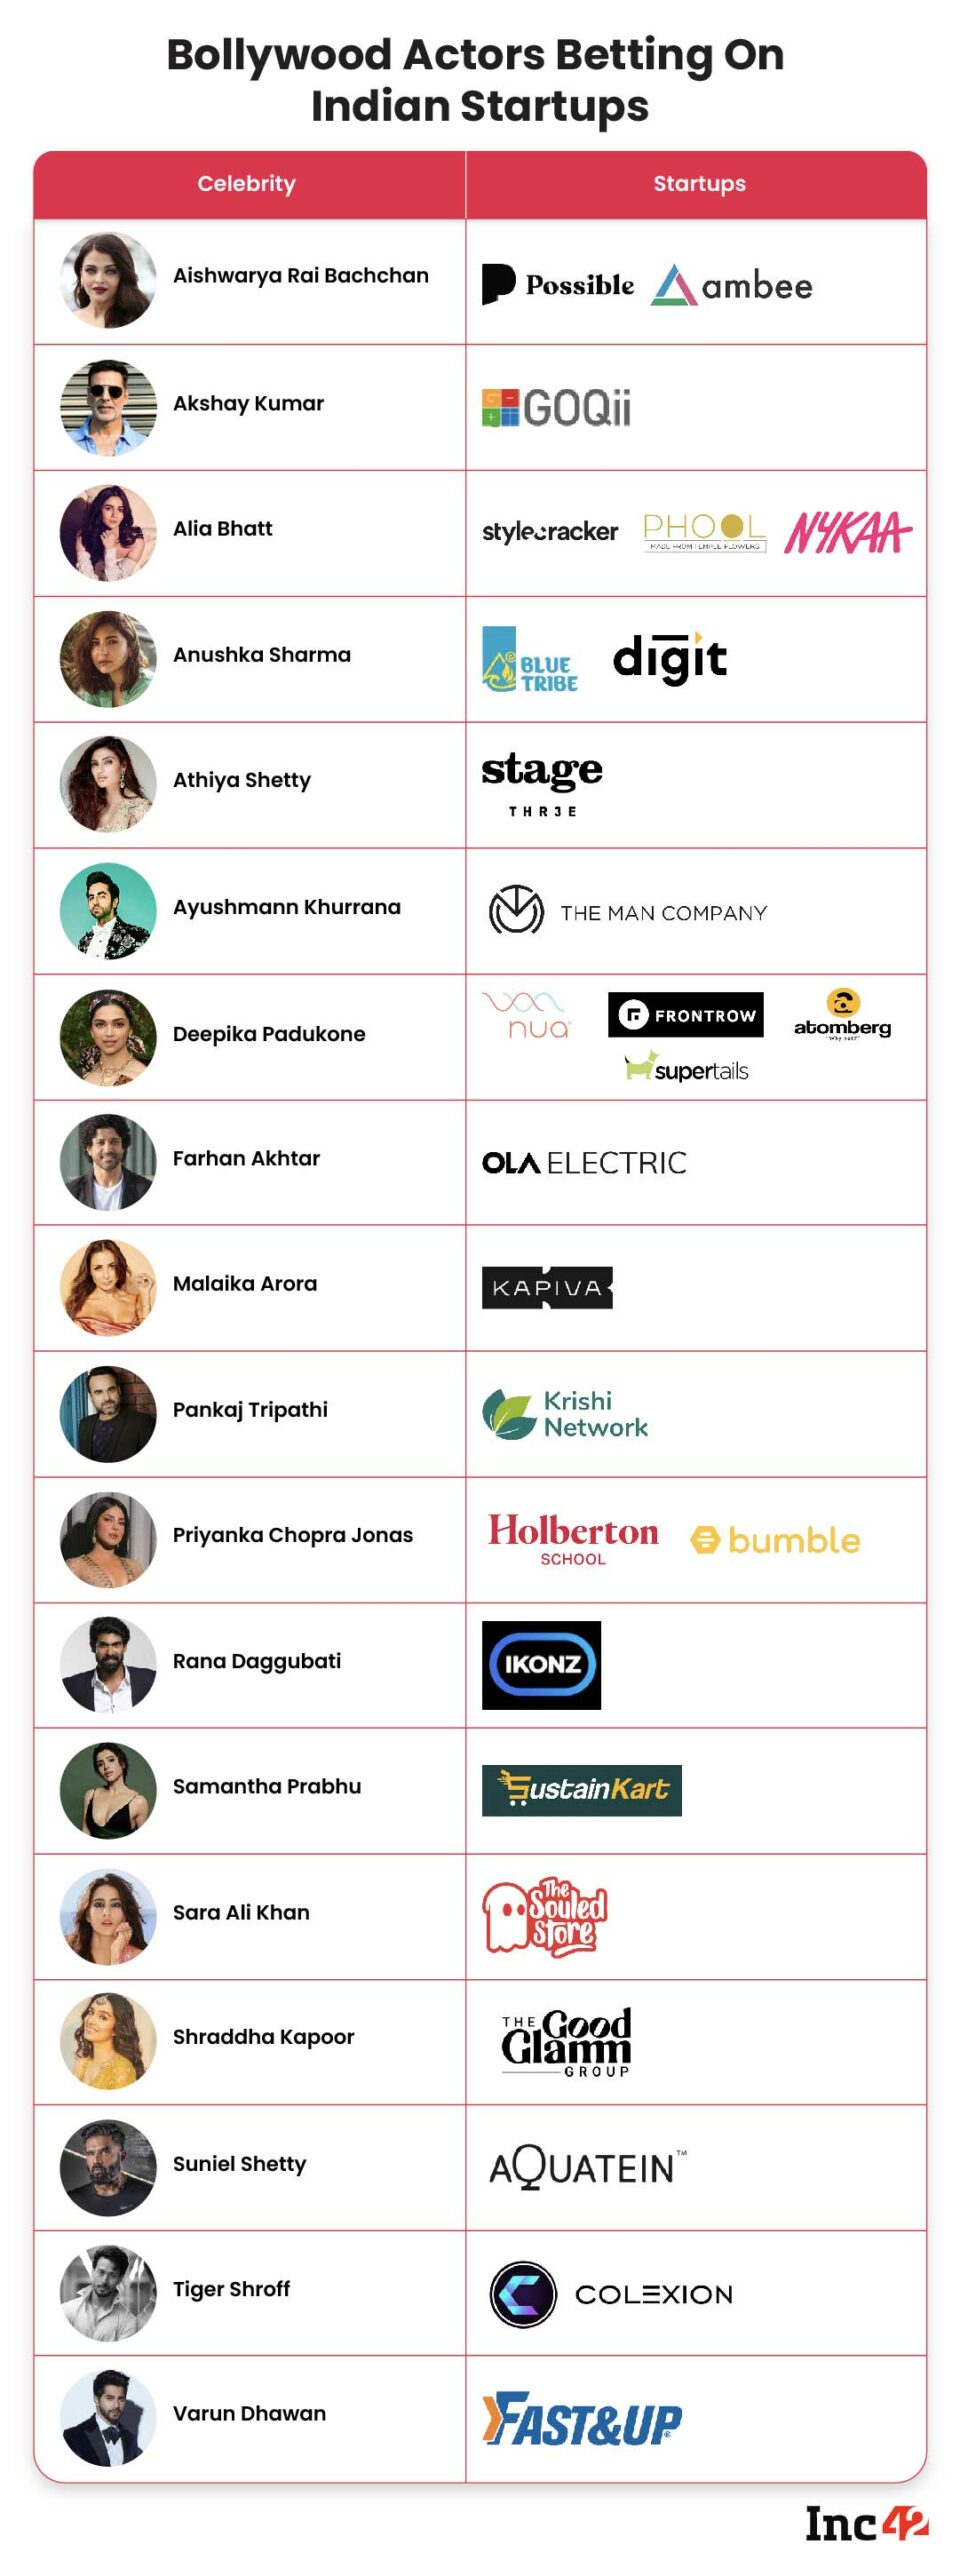 18 Bollywood Actors Betting On Indian Startups